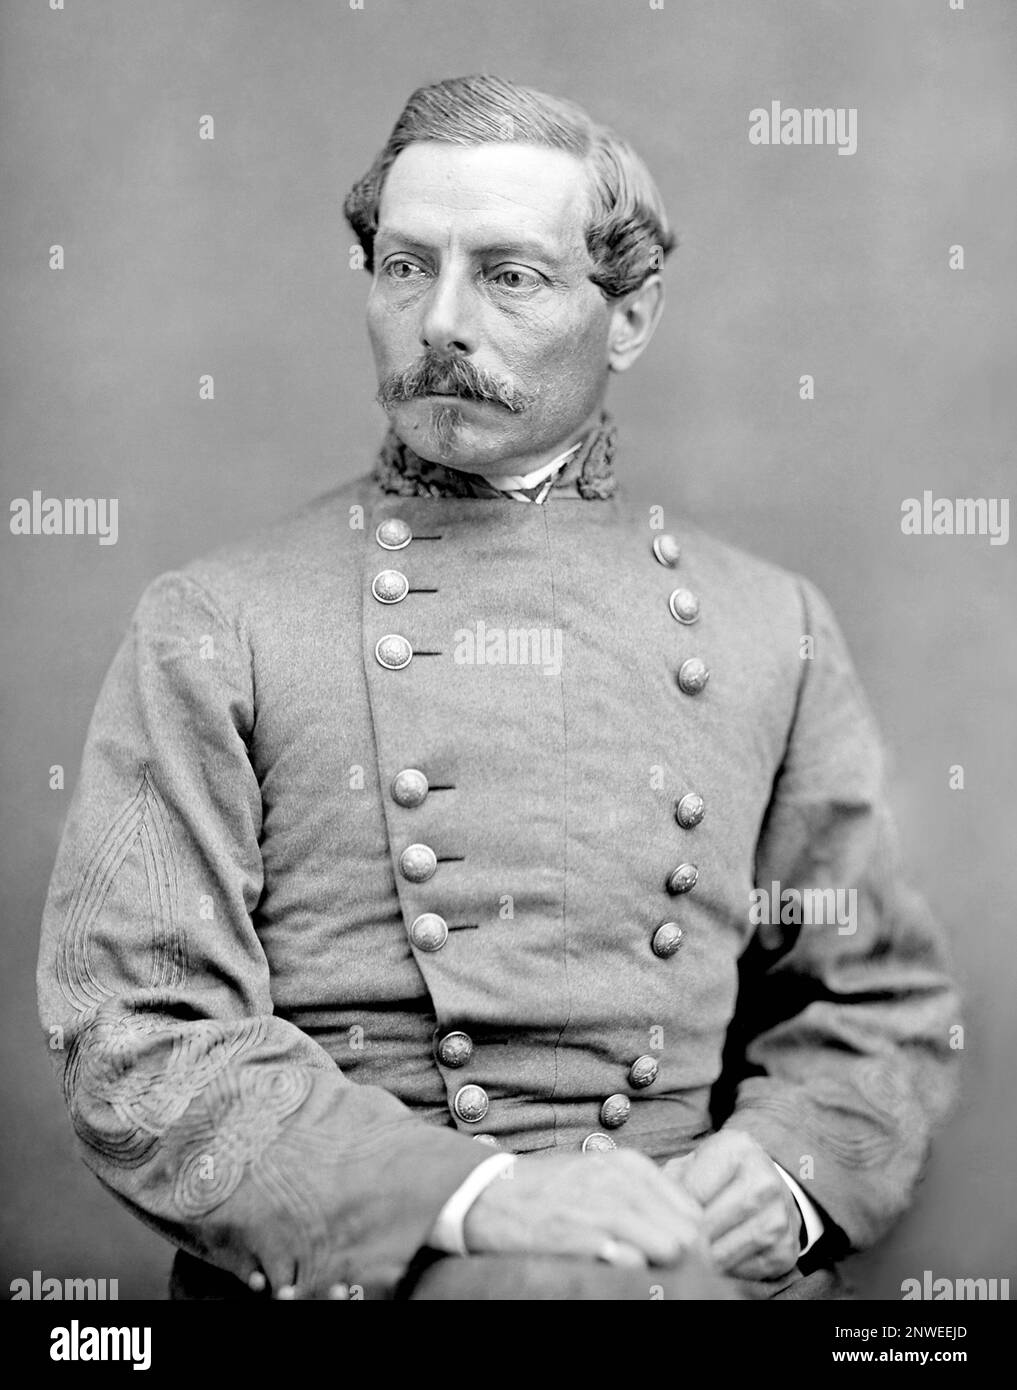 P. G. T. Beauregard, Pierre Gustave Toutant-Beauregard (1818 - 1893) Confederate general officer who started the American Civil War by leading the attack on Fort Sumter on April 12, 1861. Stock Photo